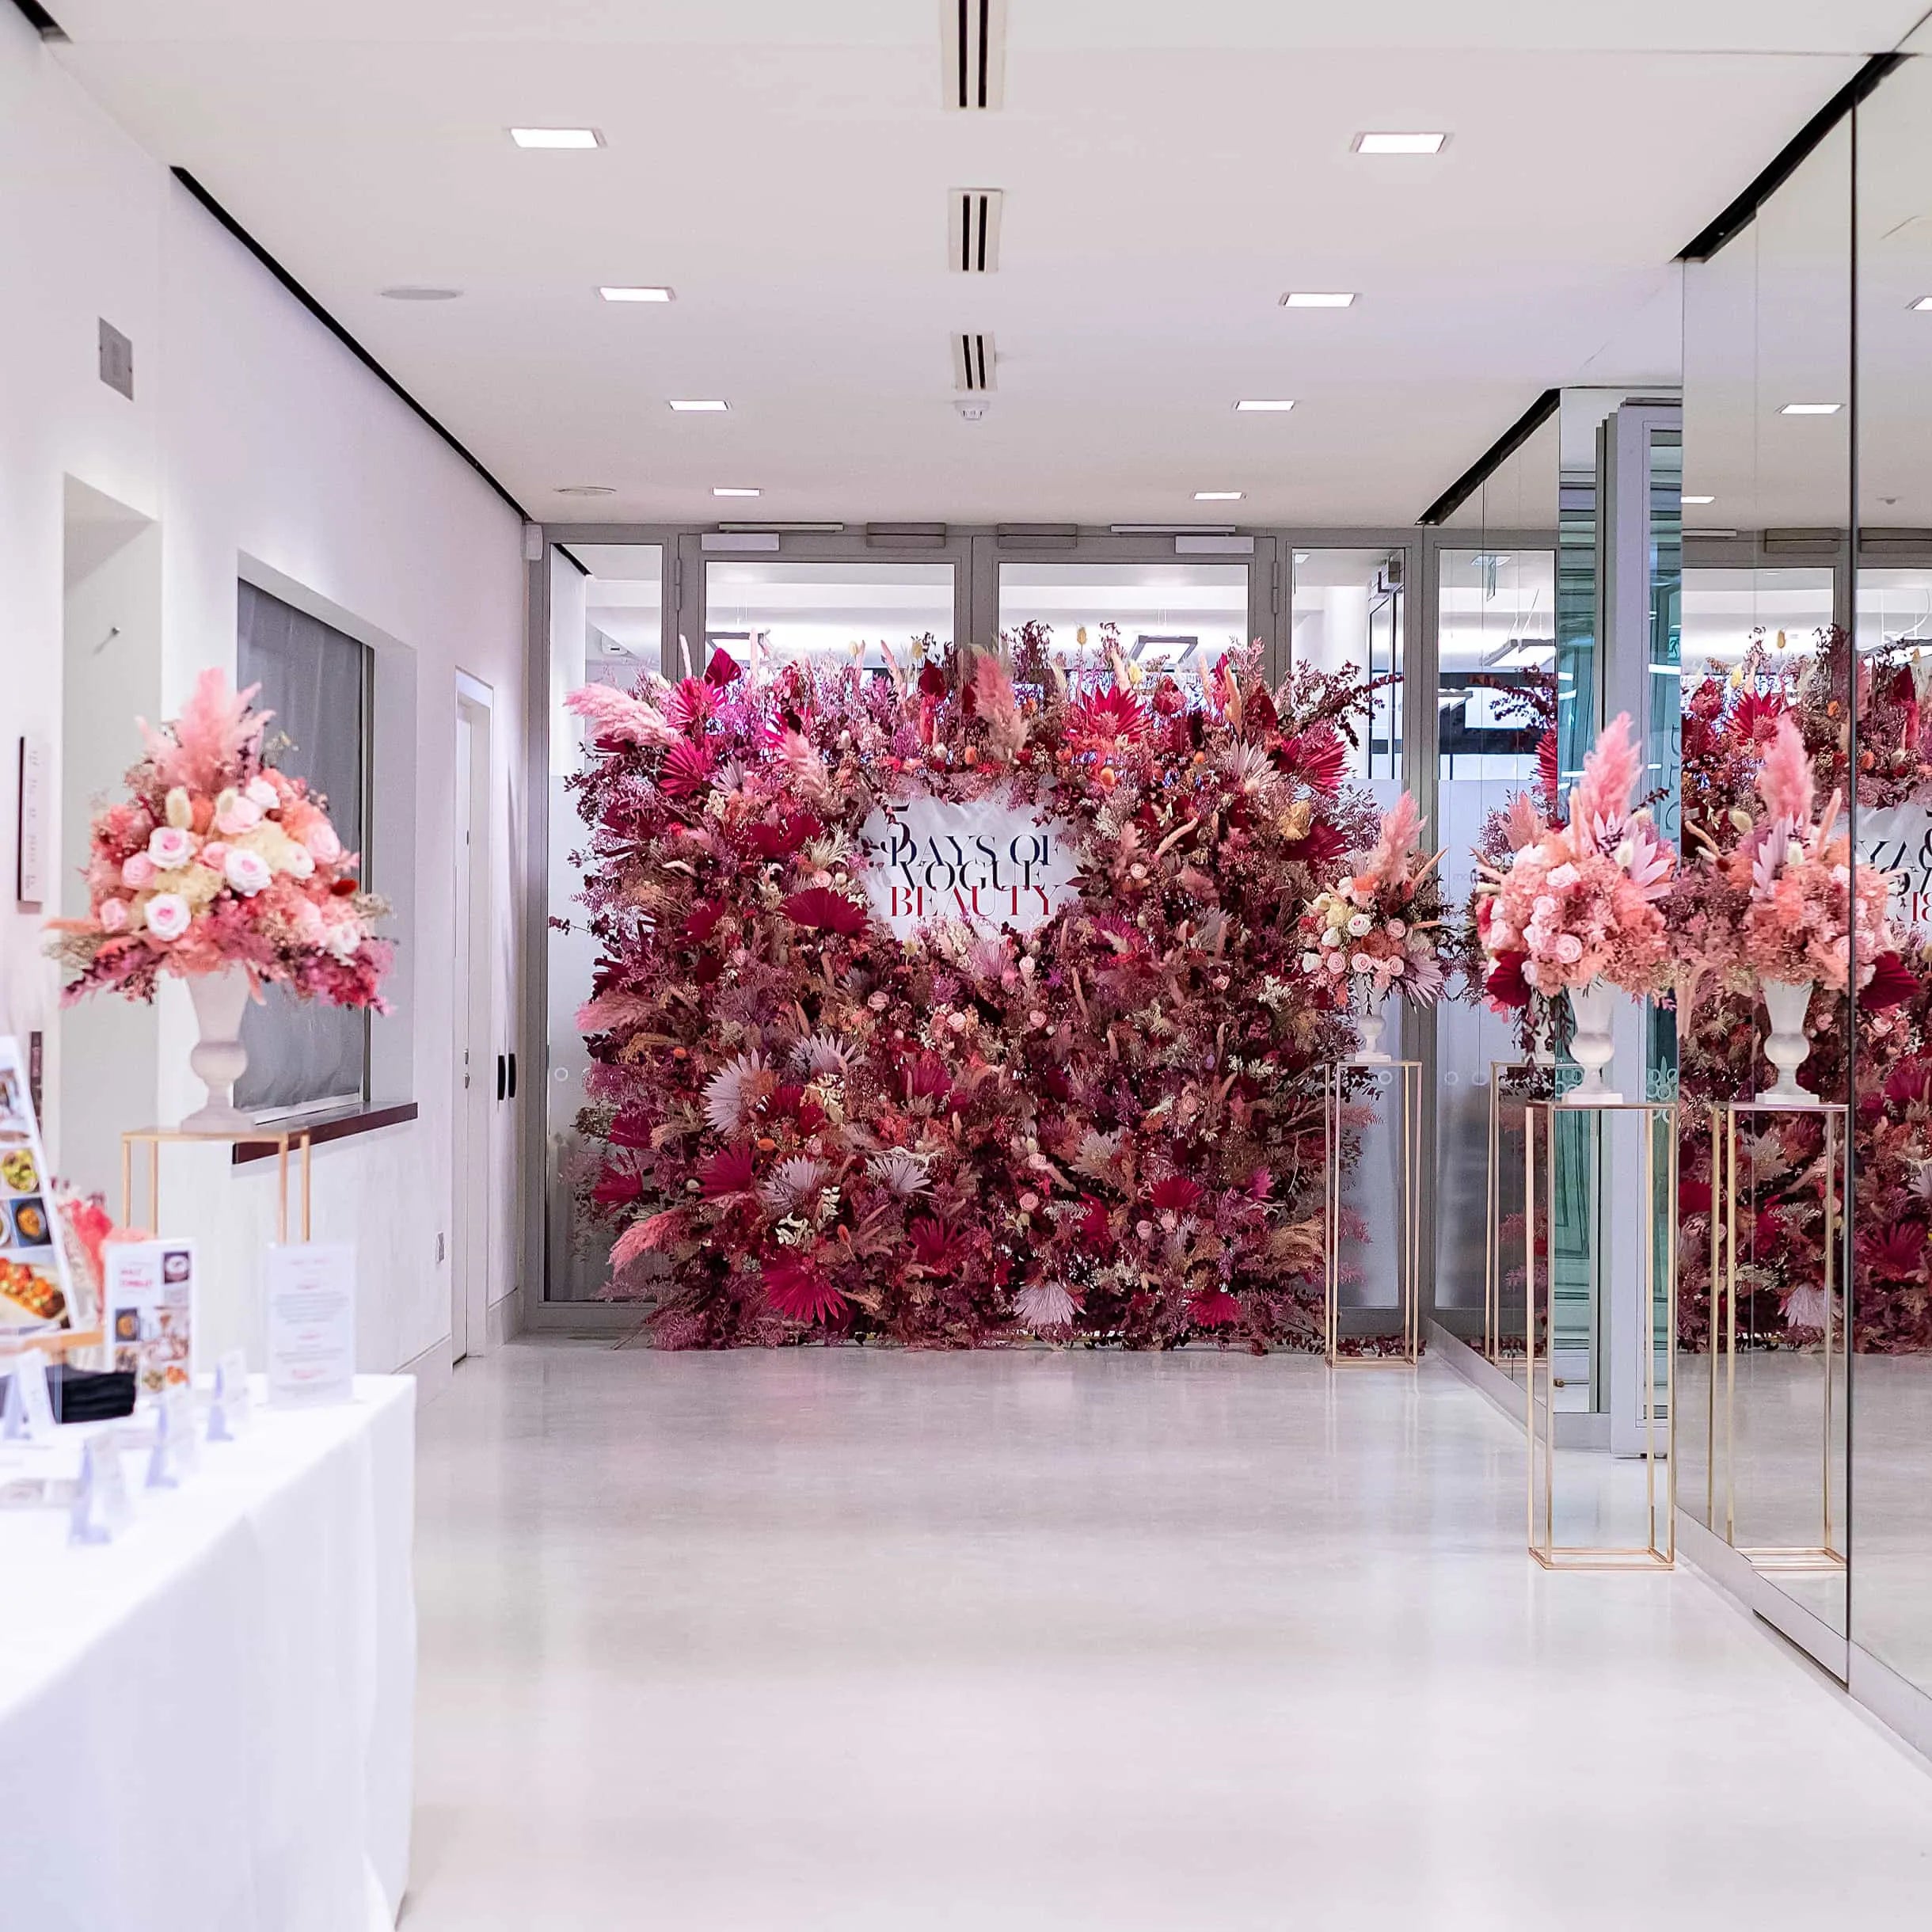 Blushing sustainable pink stems are brought together in this stunning flower wall by event florist Amaranté London for Vogue’s 5 Days of Beauty event